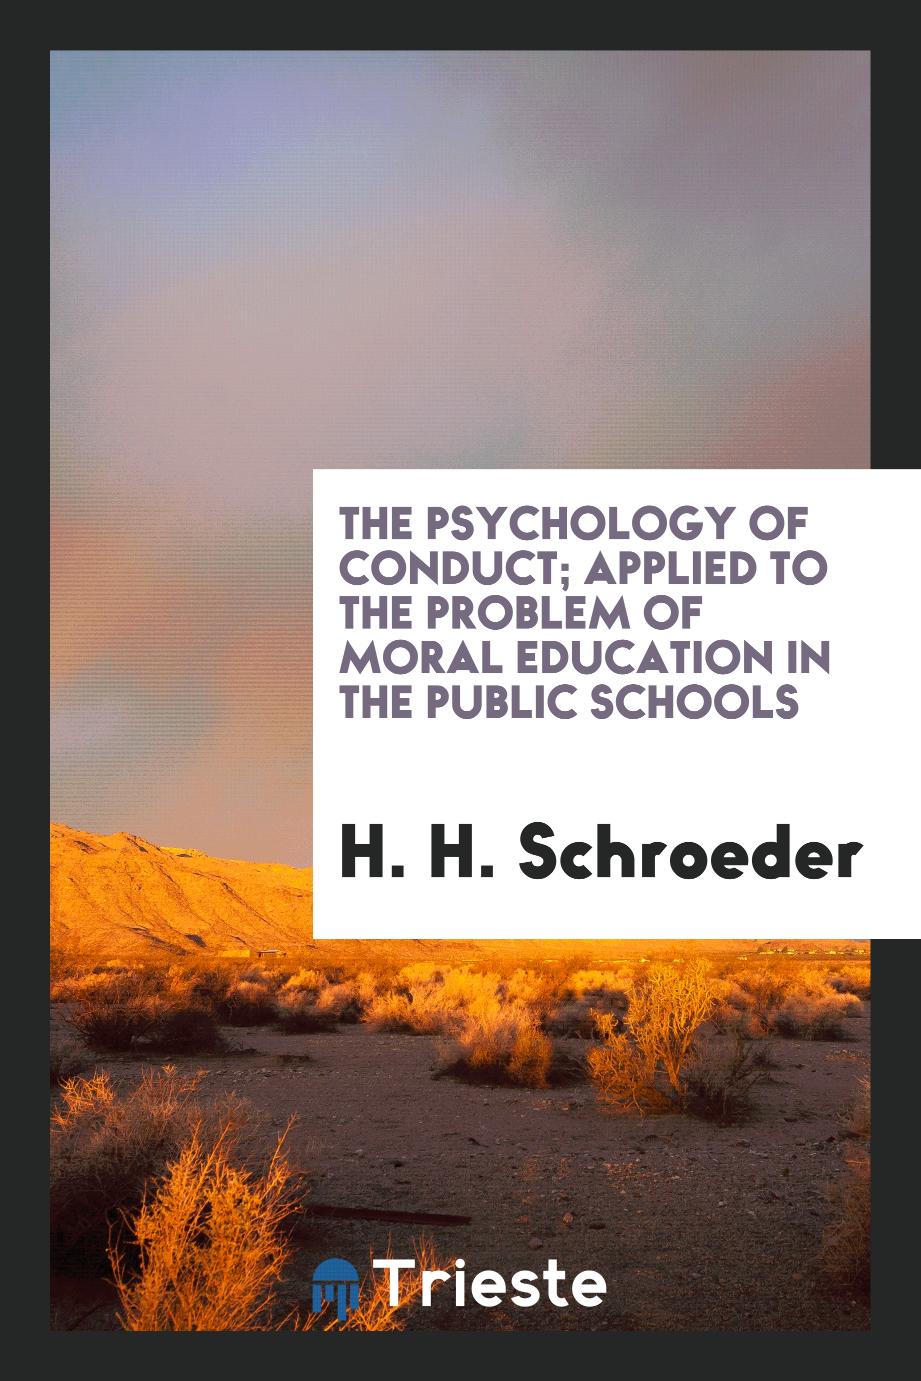 The psychology of conduct; applied to the problem of moral education in the public schools